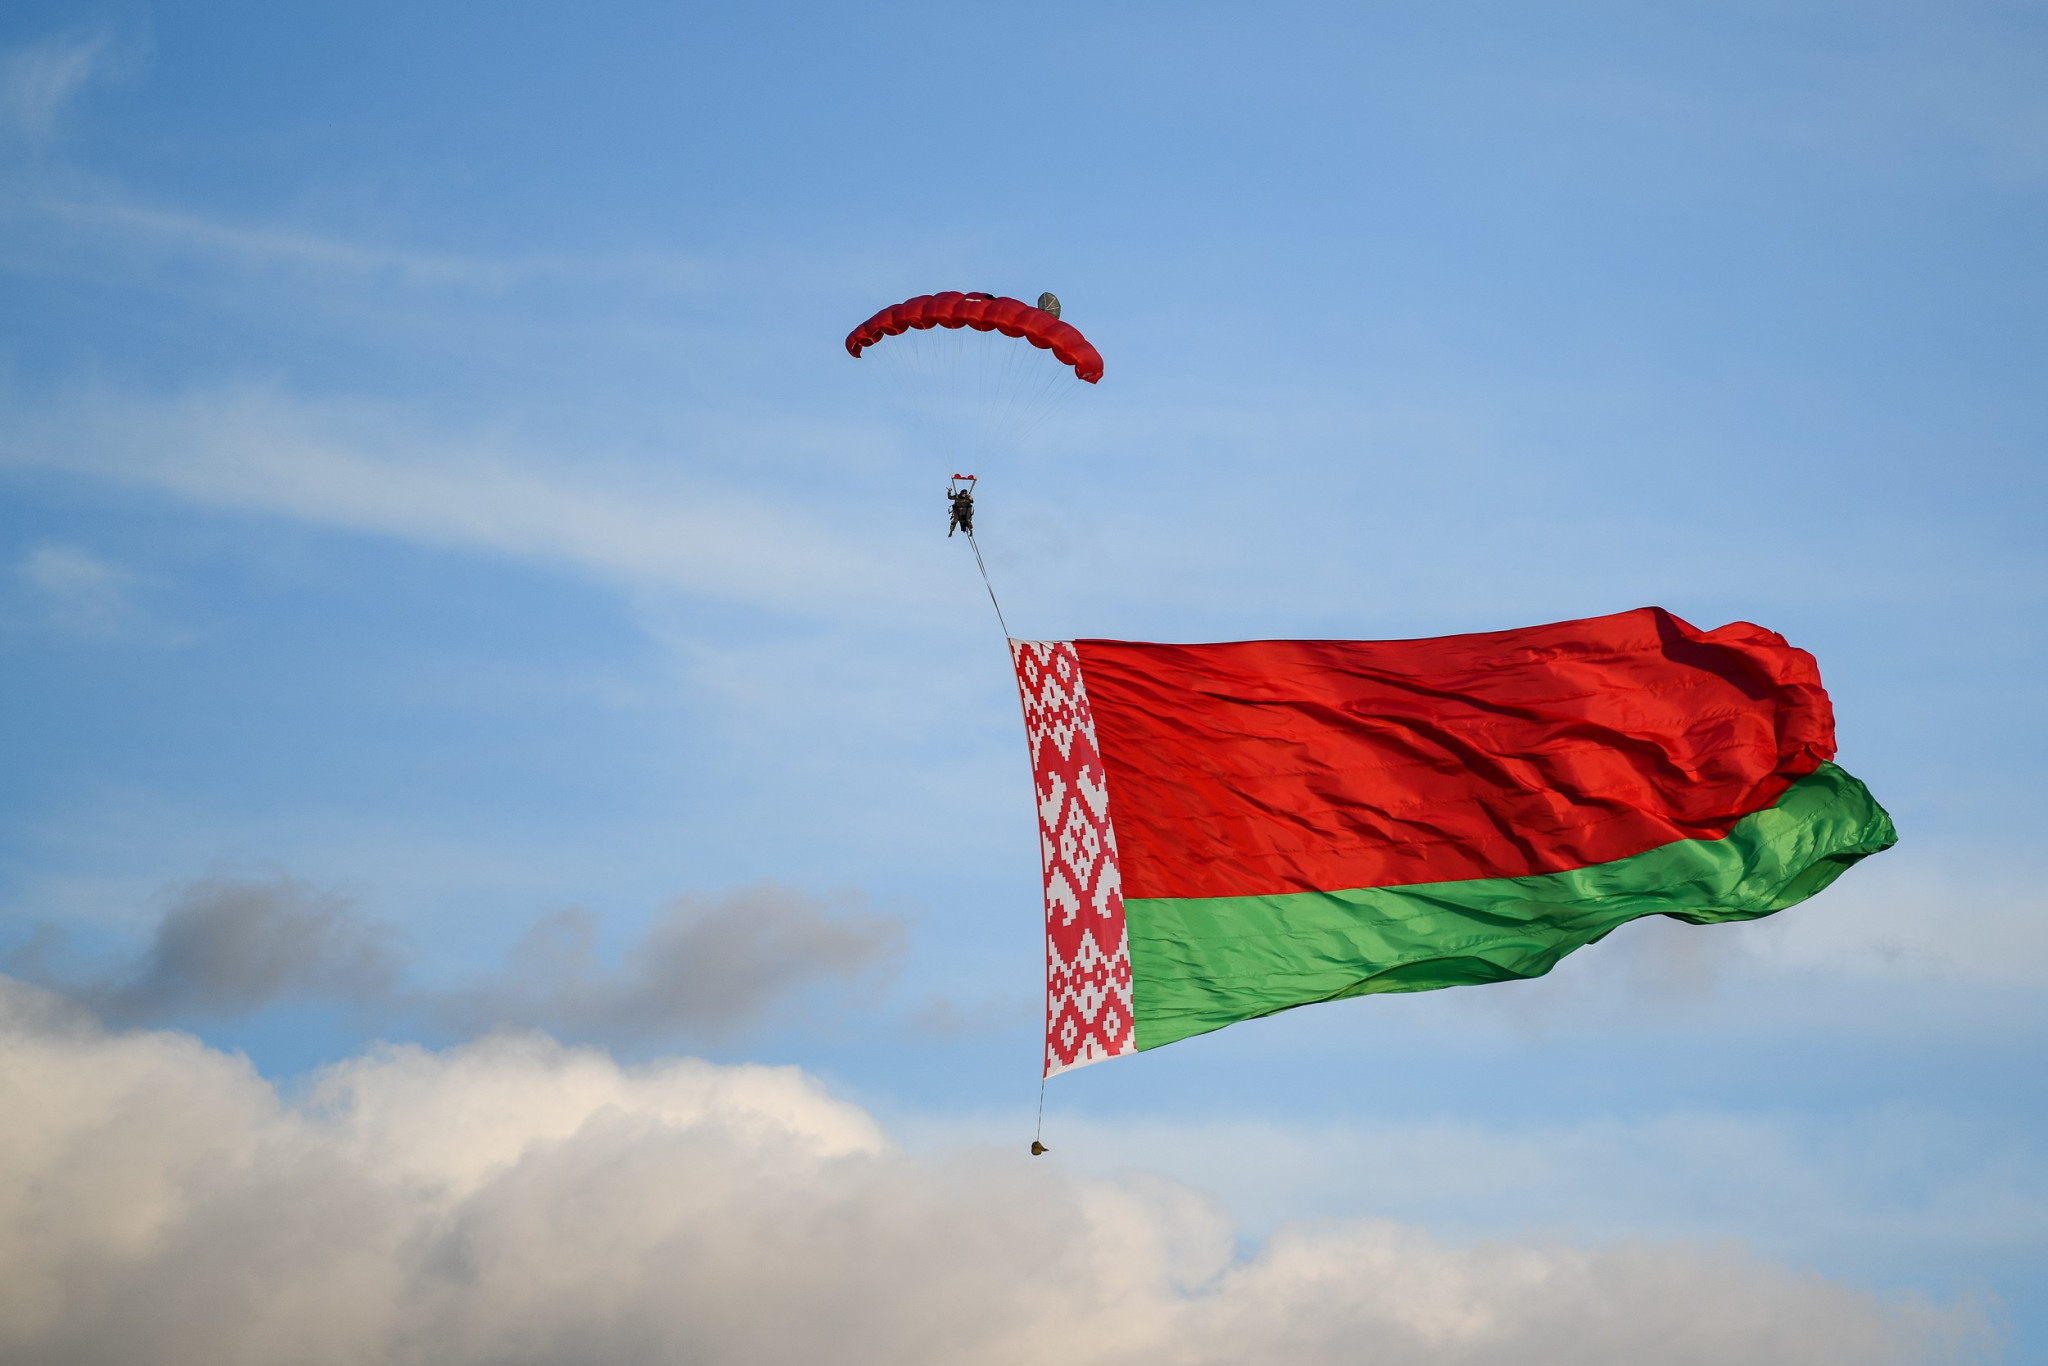 A skydiver displayed the Belarus flag as part of the 